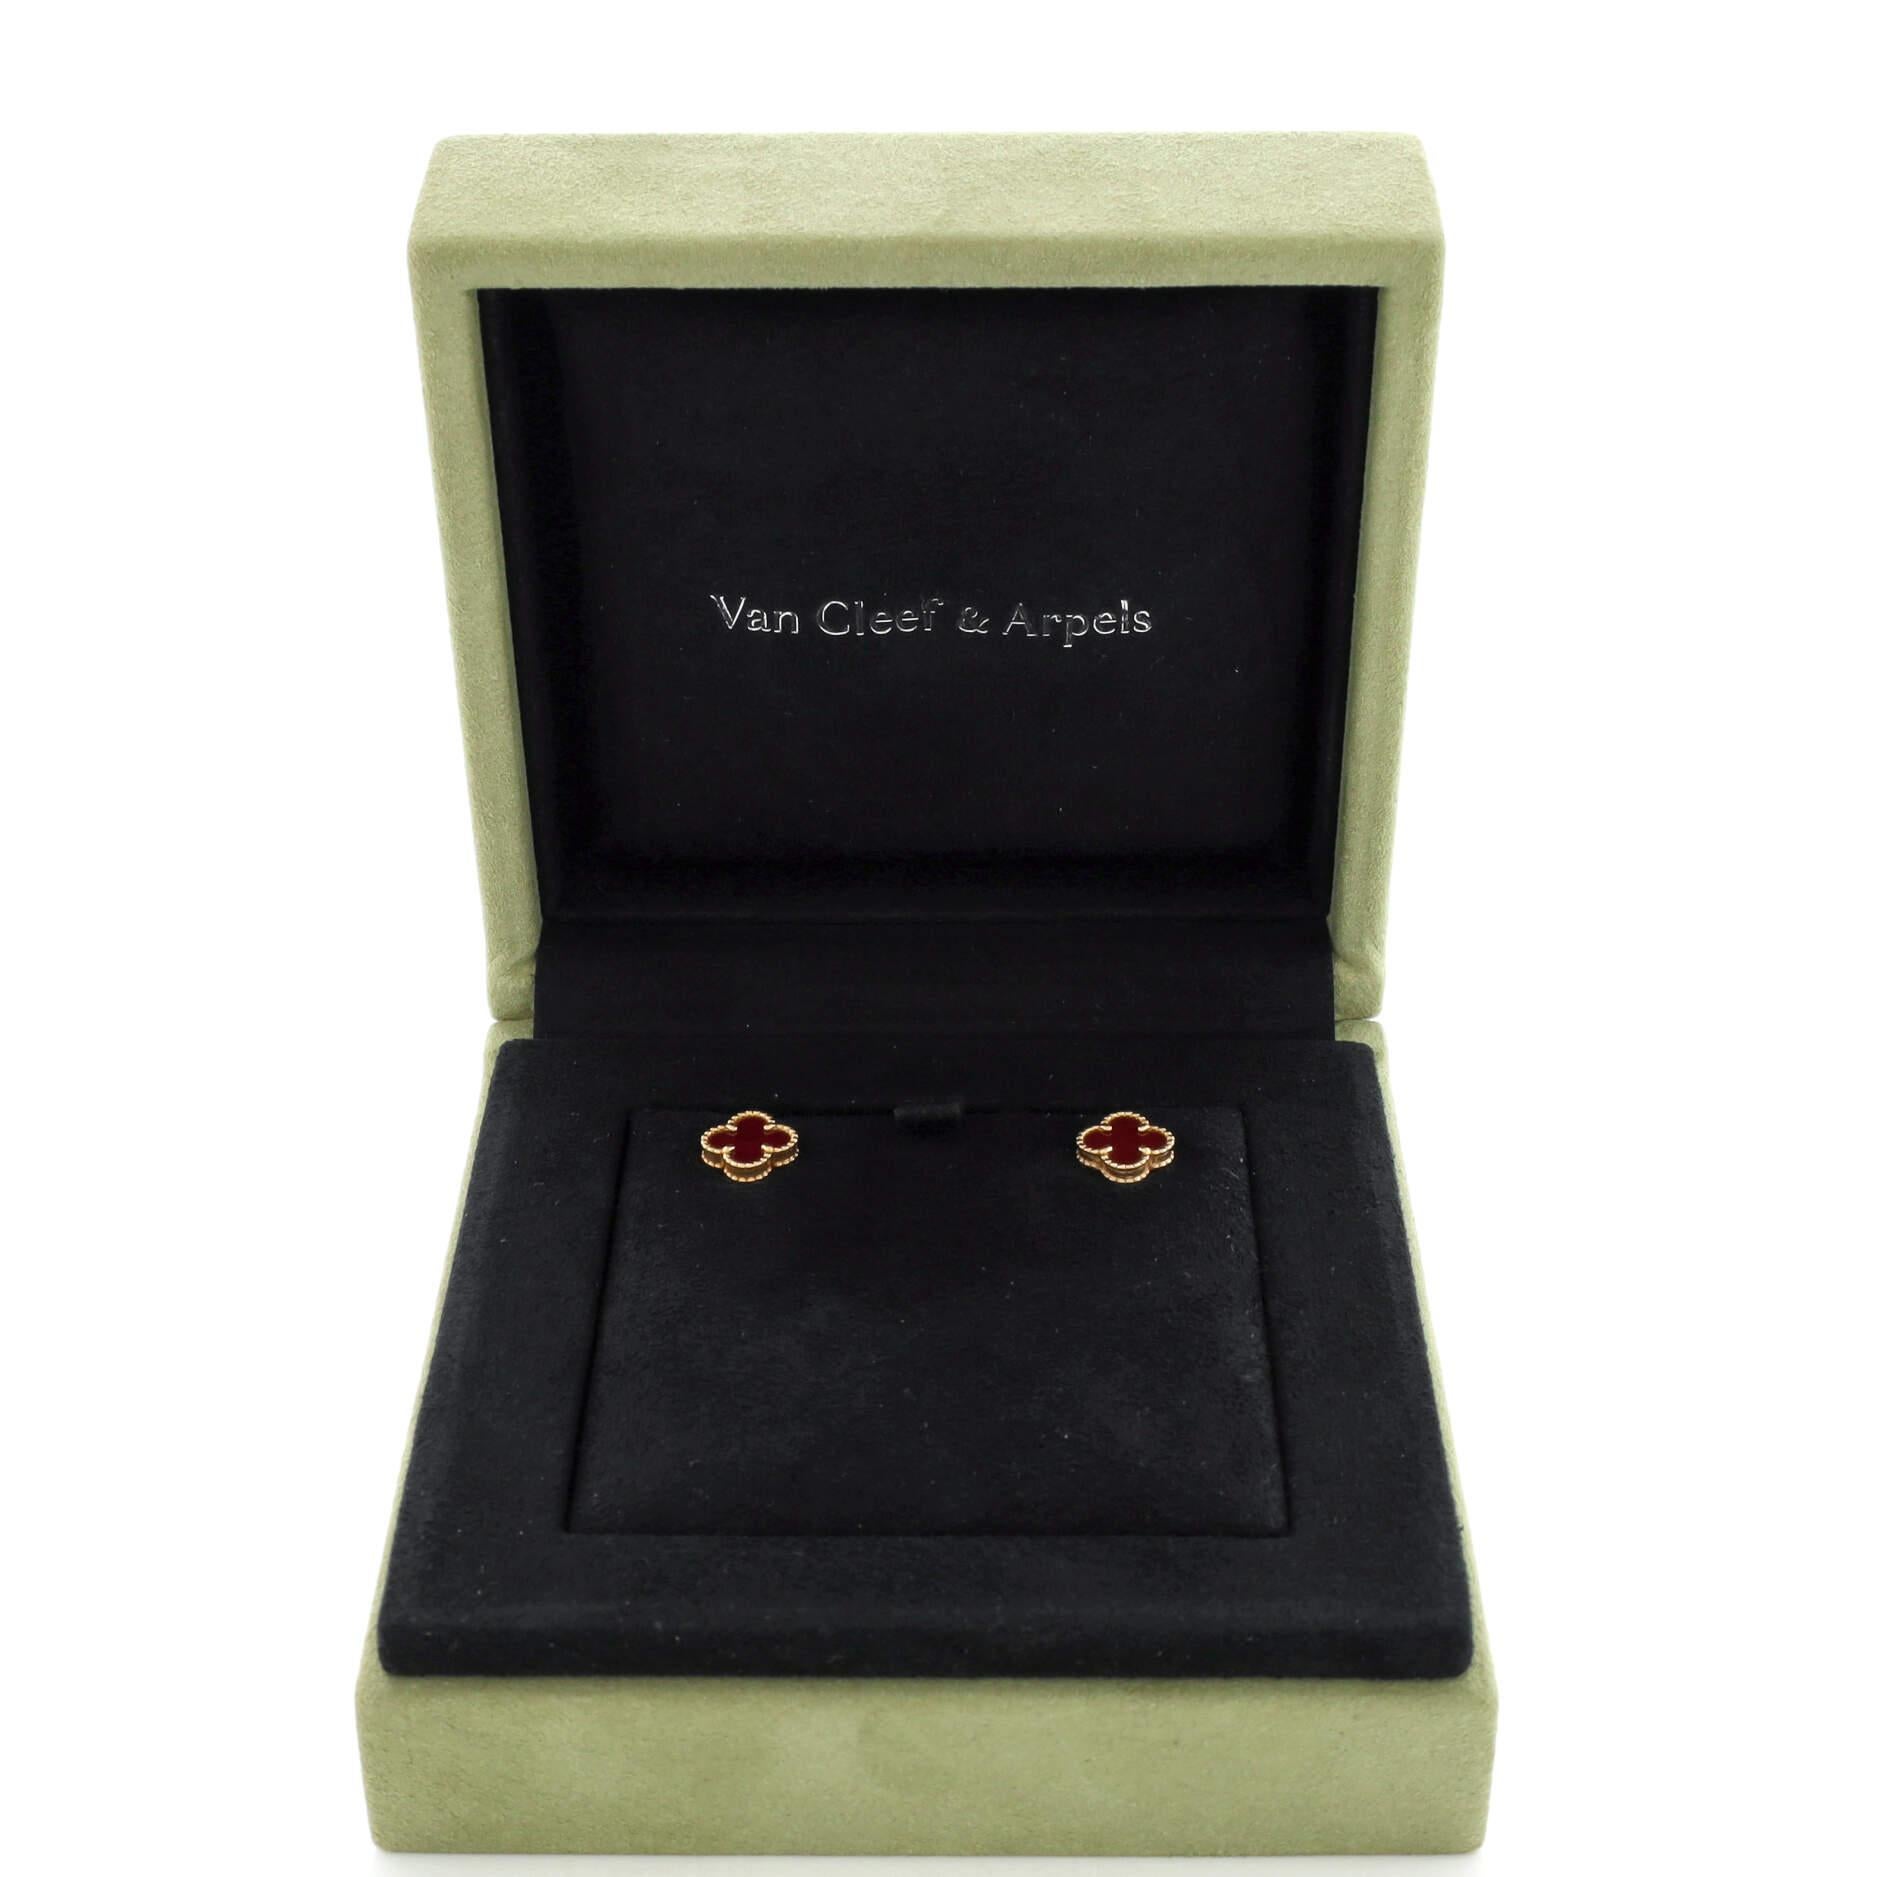 Condition: Great. Minor wear throughout.
Accessories:
Measurements: Height/Length: 9.25 mm, Width: 9.25 mm
Designer: Van Cleef & Arpels
Model: Sweet Alhambra Stud Earrings 18K Rose Gold and Carnelian
Exterior Color: Rose Gold
Item Number: 229351/1